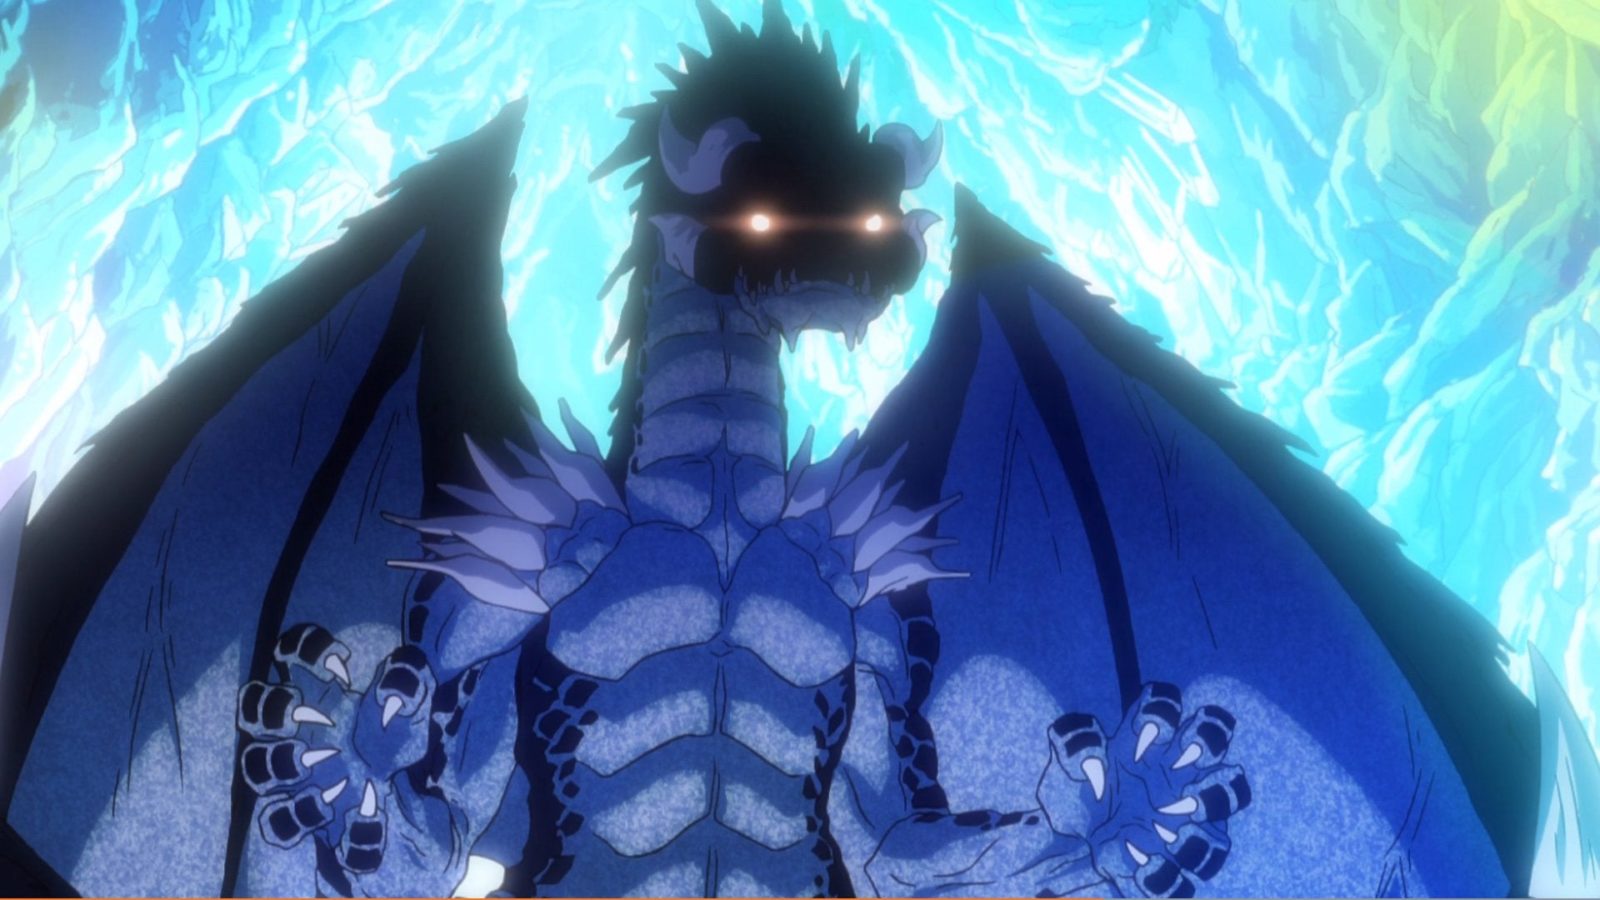 That Time I Got Reincarnated As A Slime Season 2 Episode 17 Spoilers, Release Date and Time